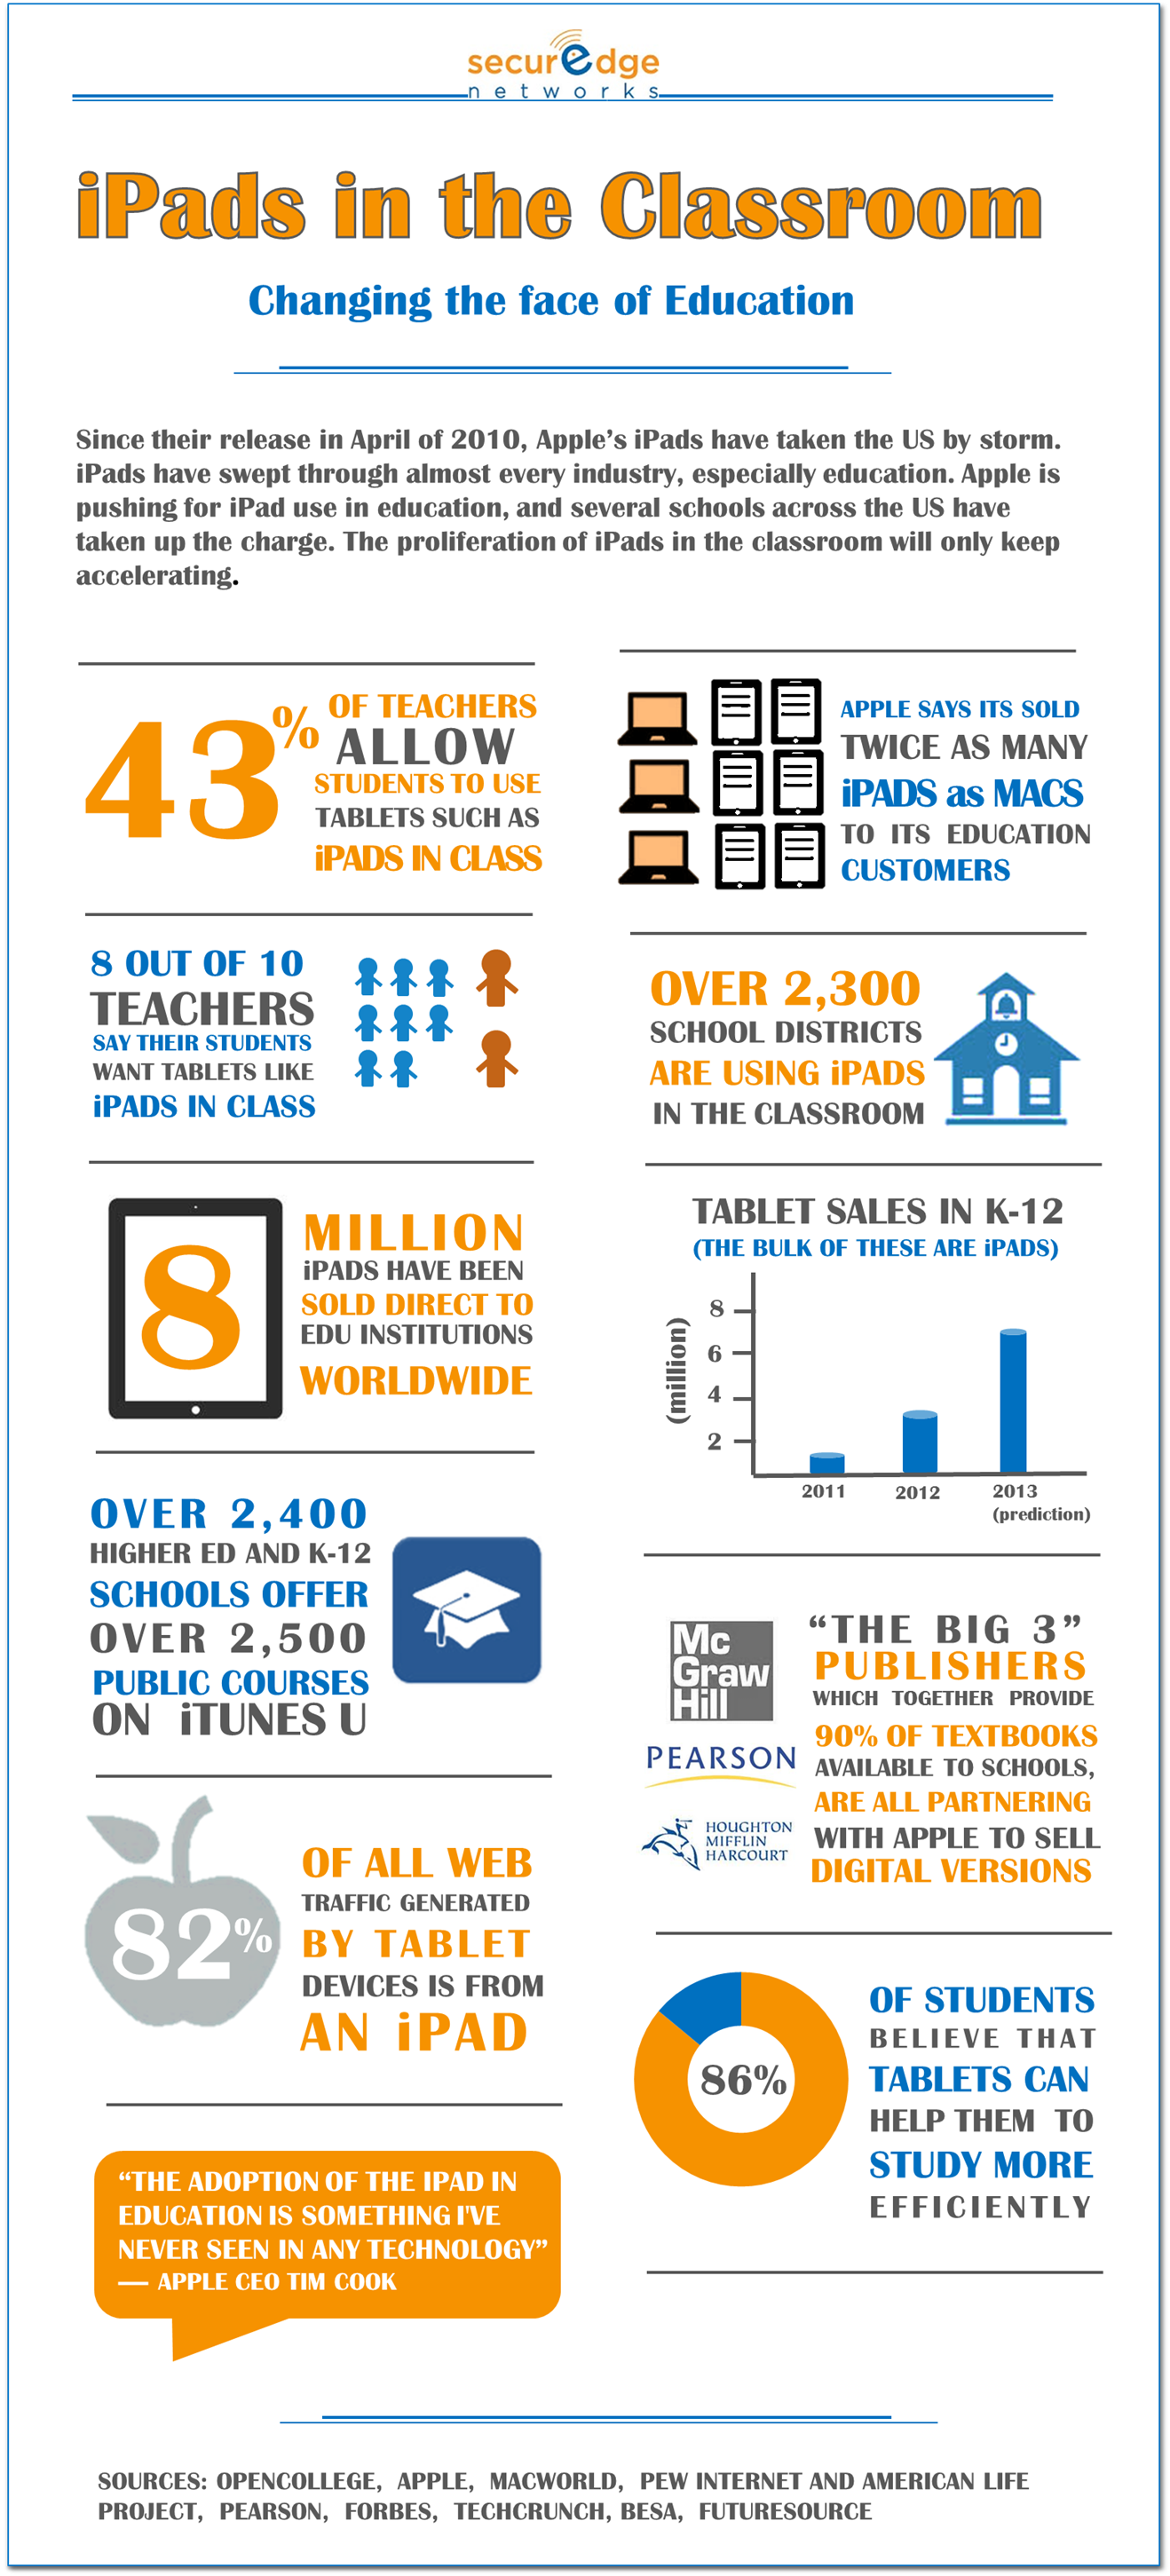 ipads in the classroom infographic